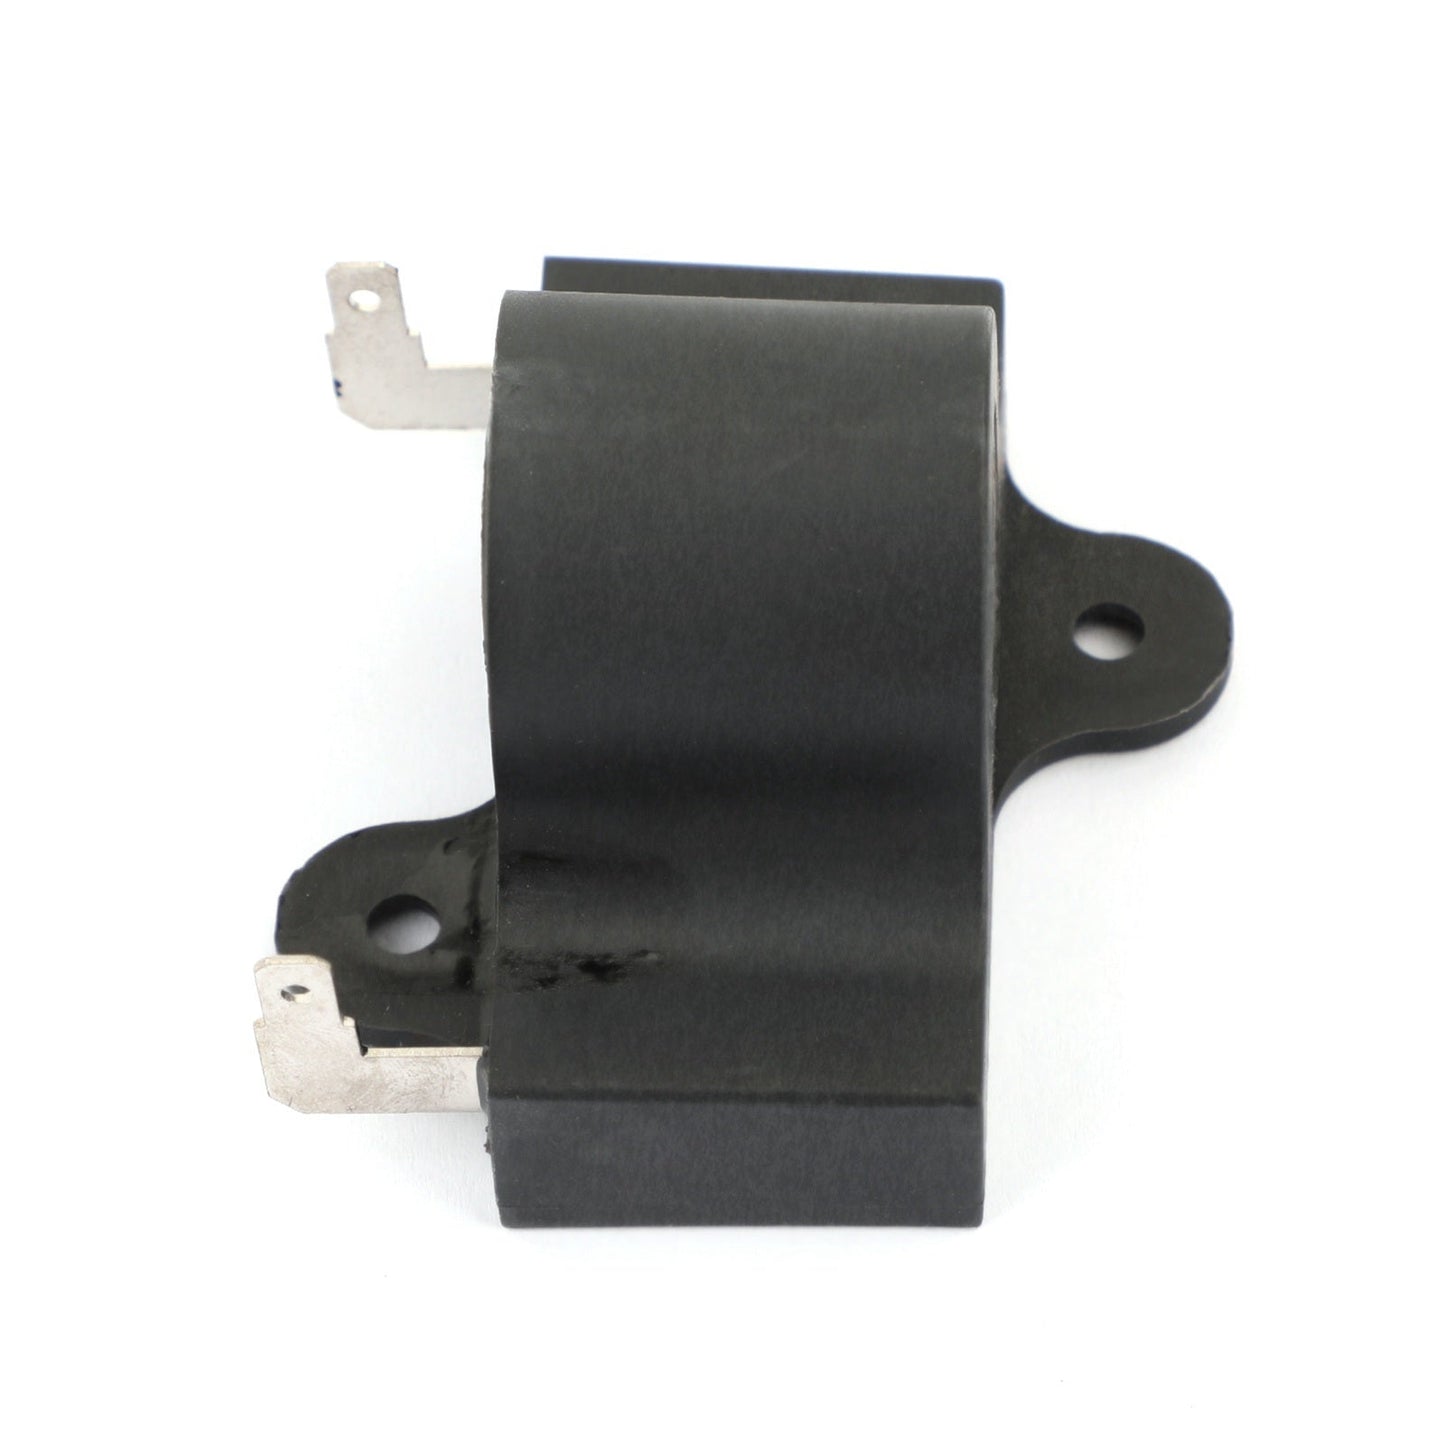 Inductive Throttle Sensor For all EZGO TXT, DCS, Medalist and PDS electric golf cart models 1994.5 & UP